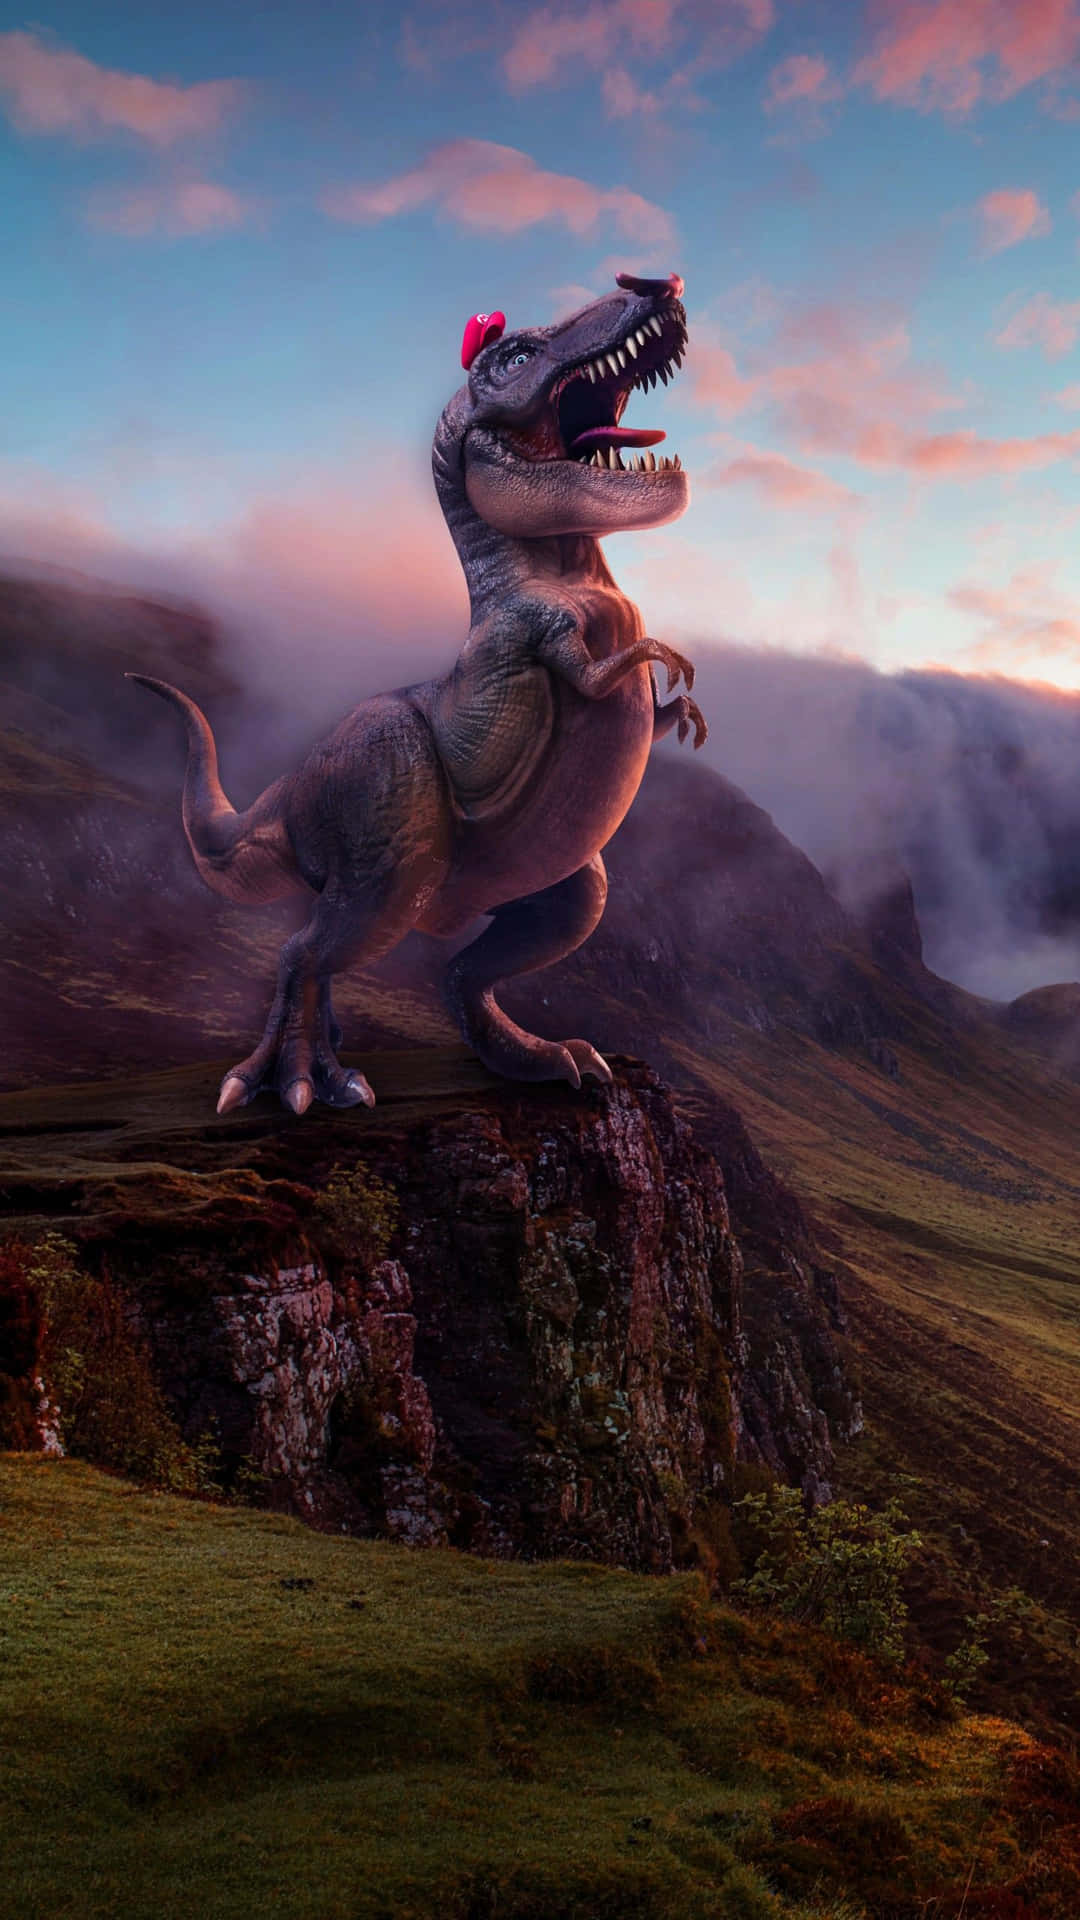 Cool Dinosaur In Hilly Mountain Background